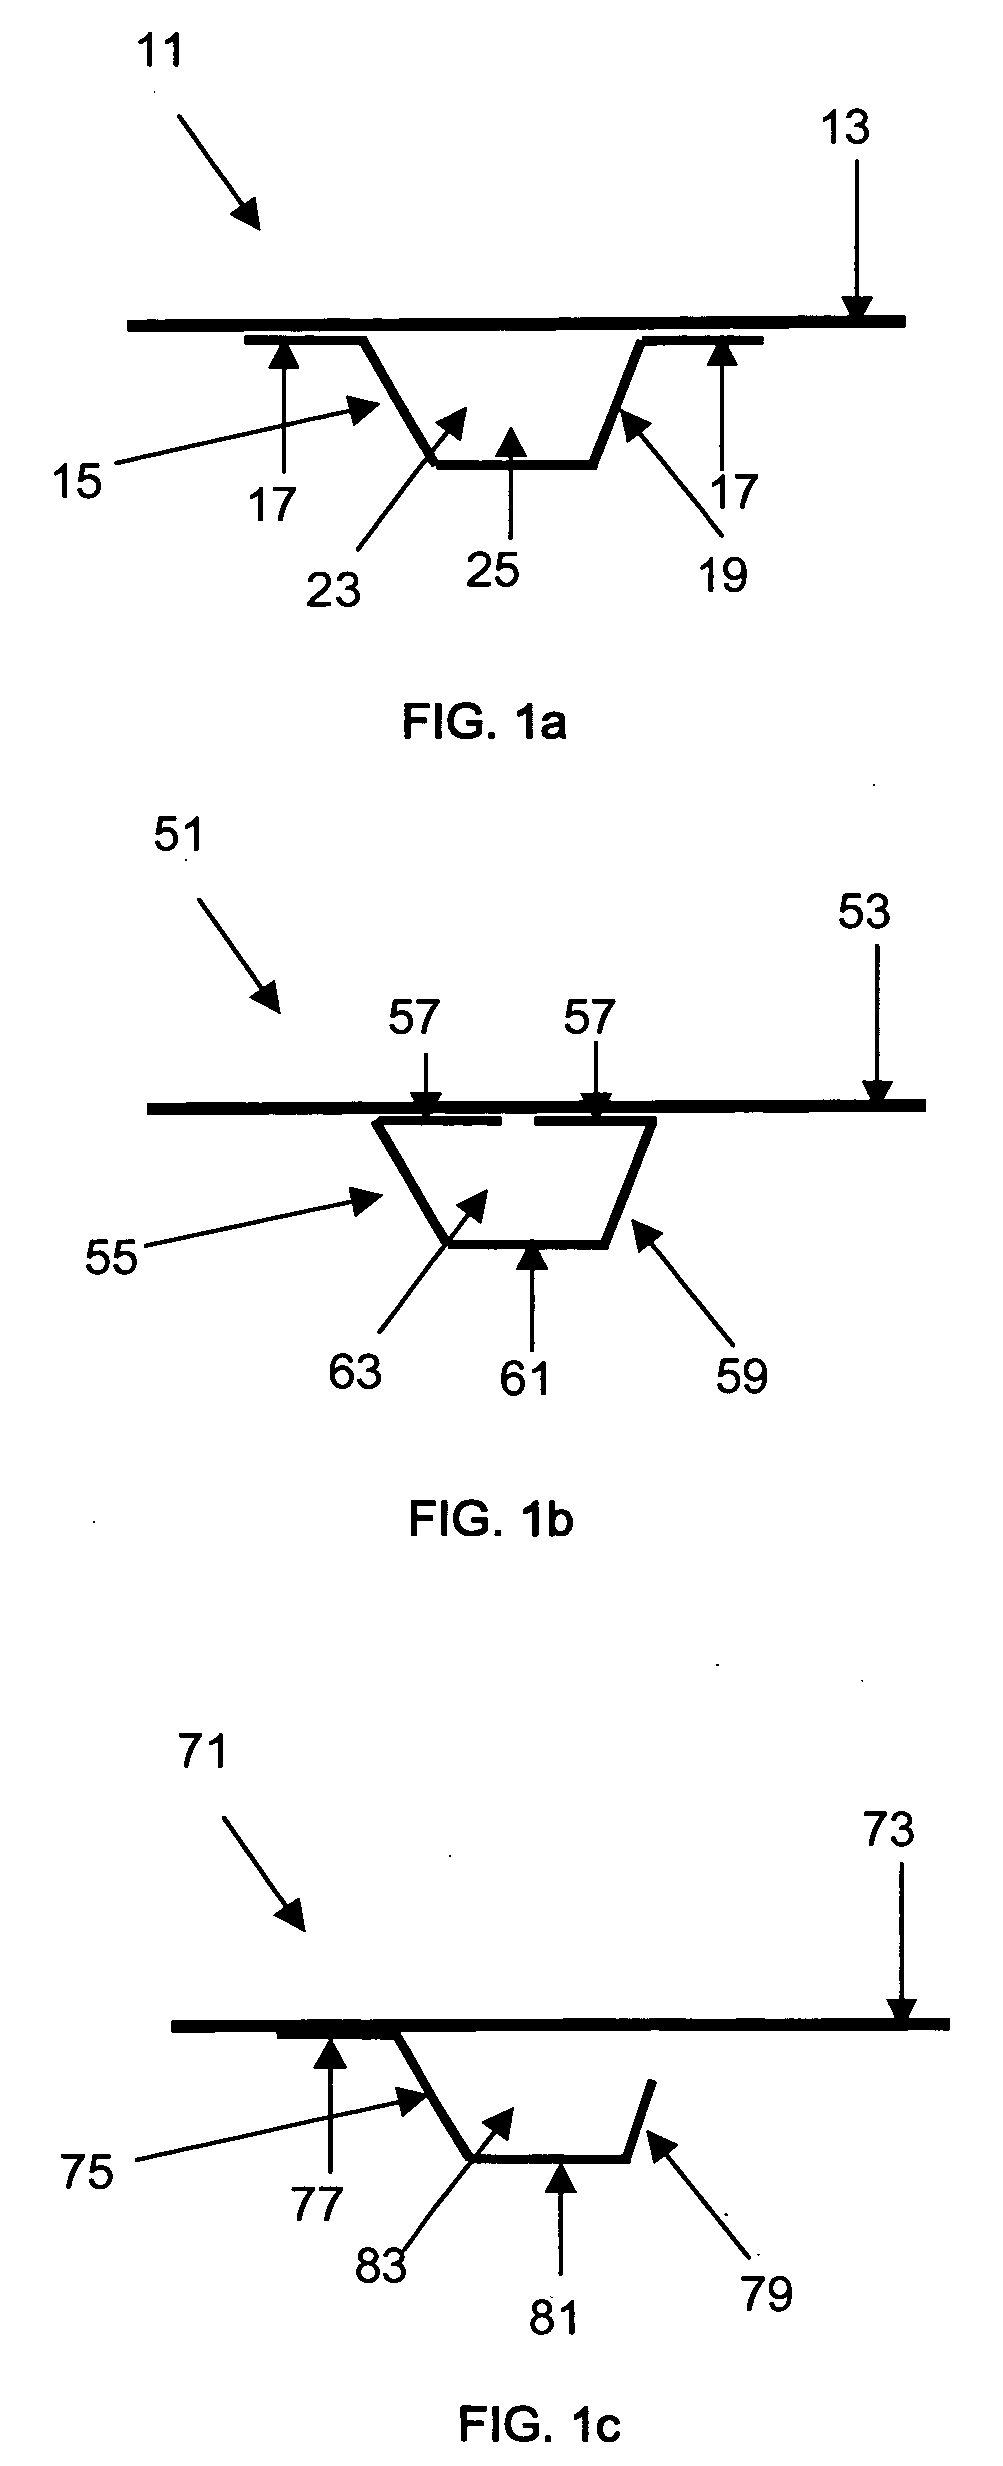 Process for manufacturing composite material structures with collapsible tooling